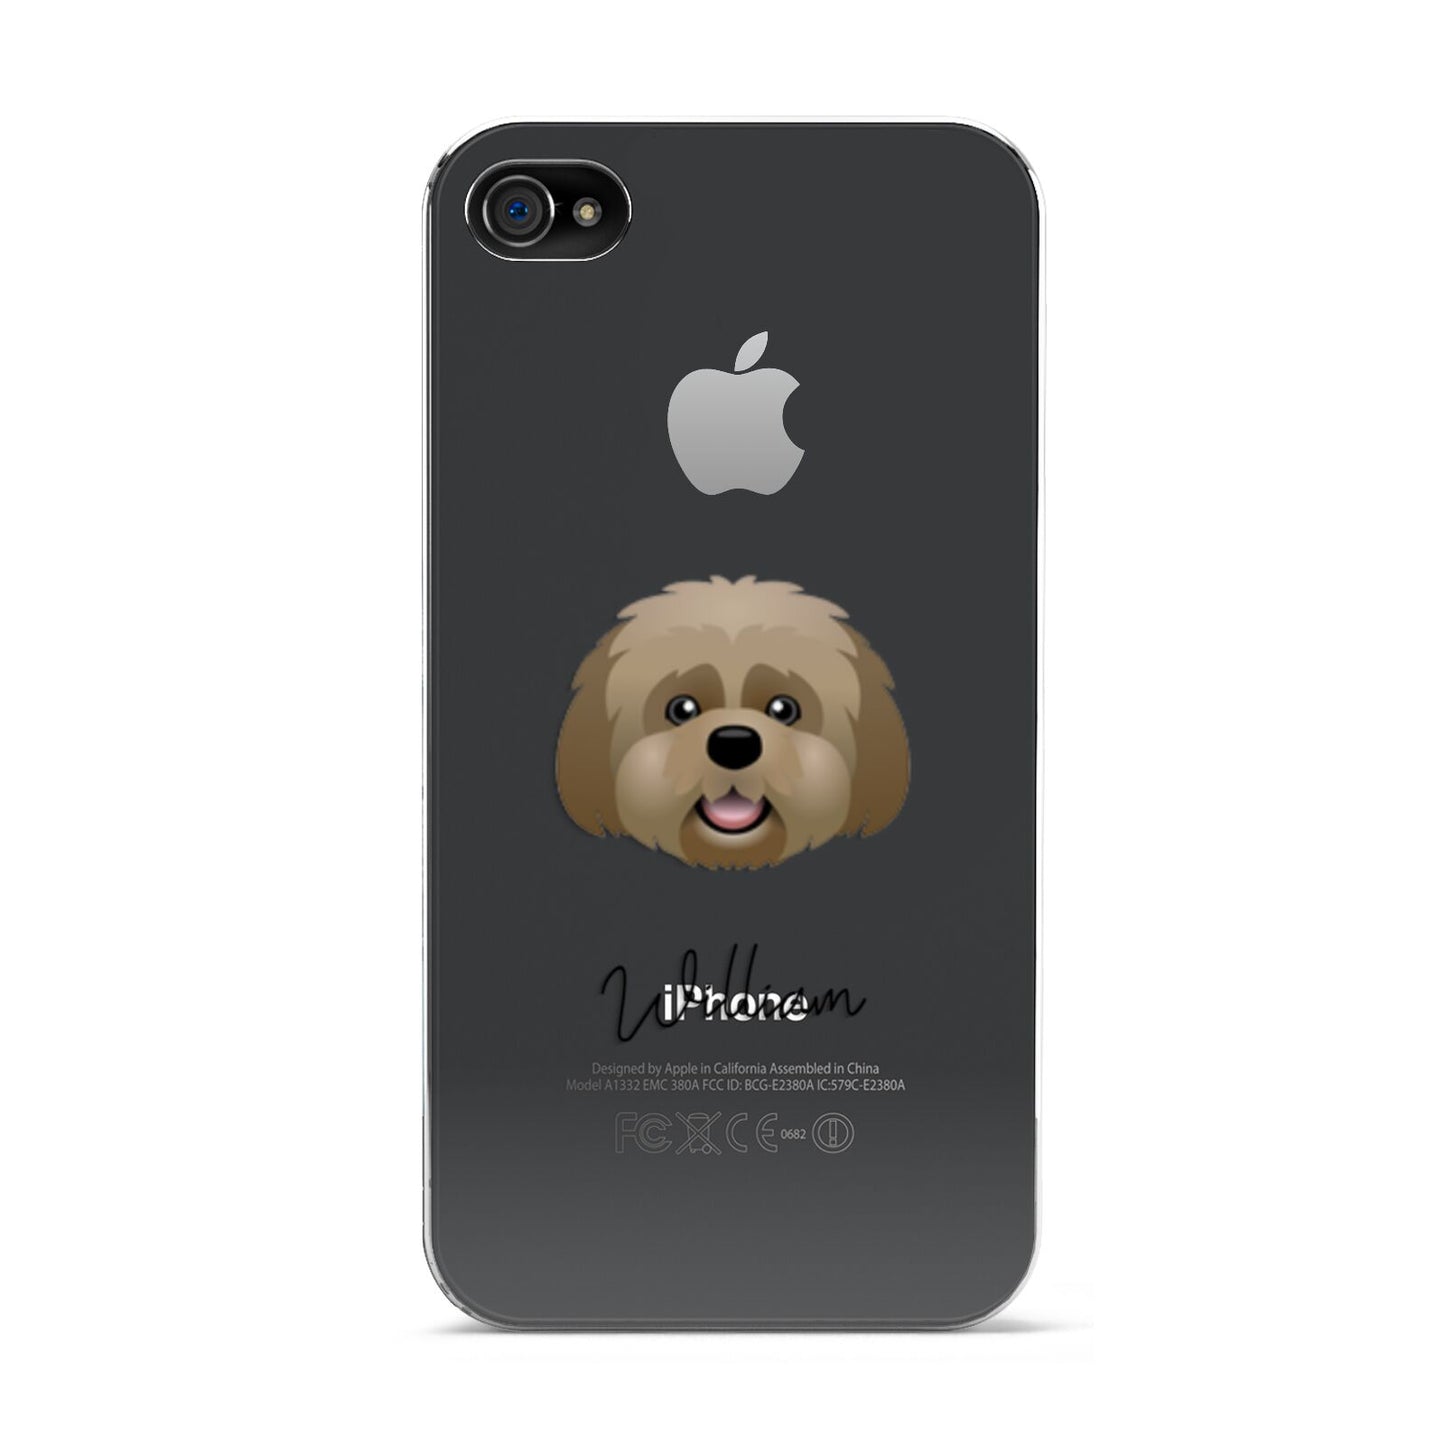 Lhatese Personalised Apple iPhone 4s Case